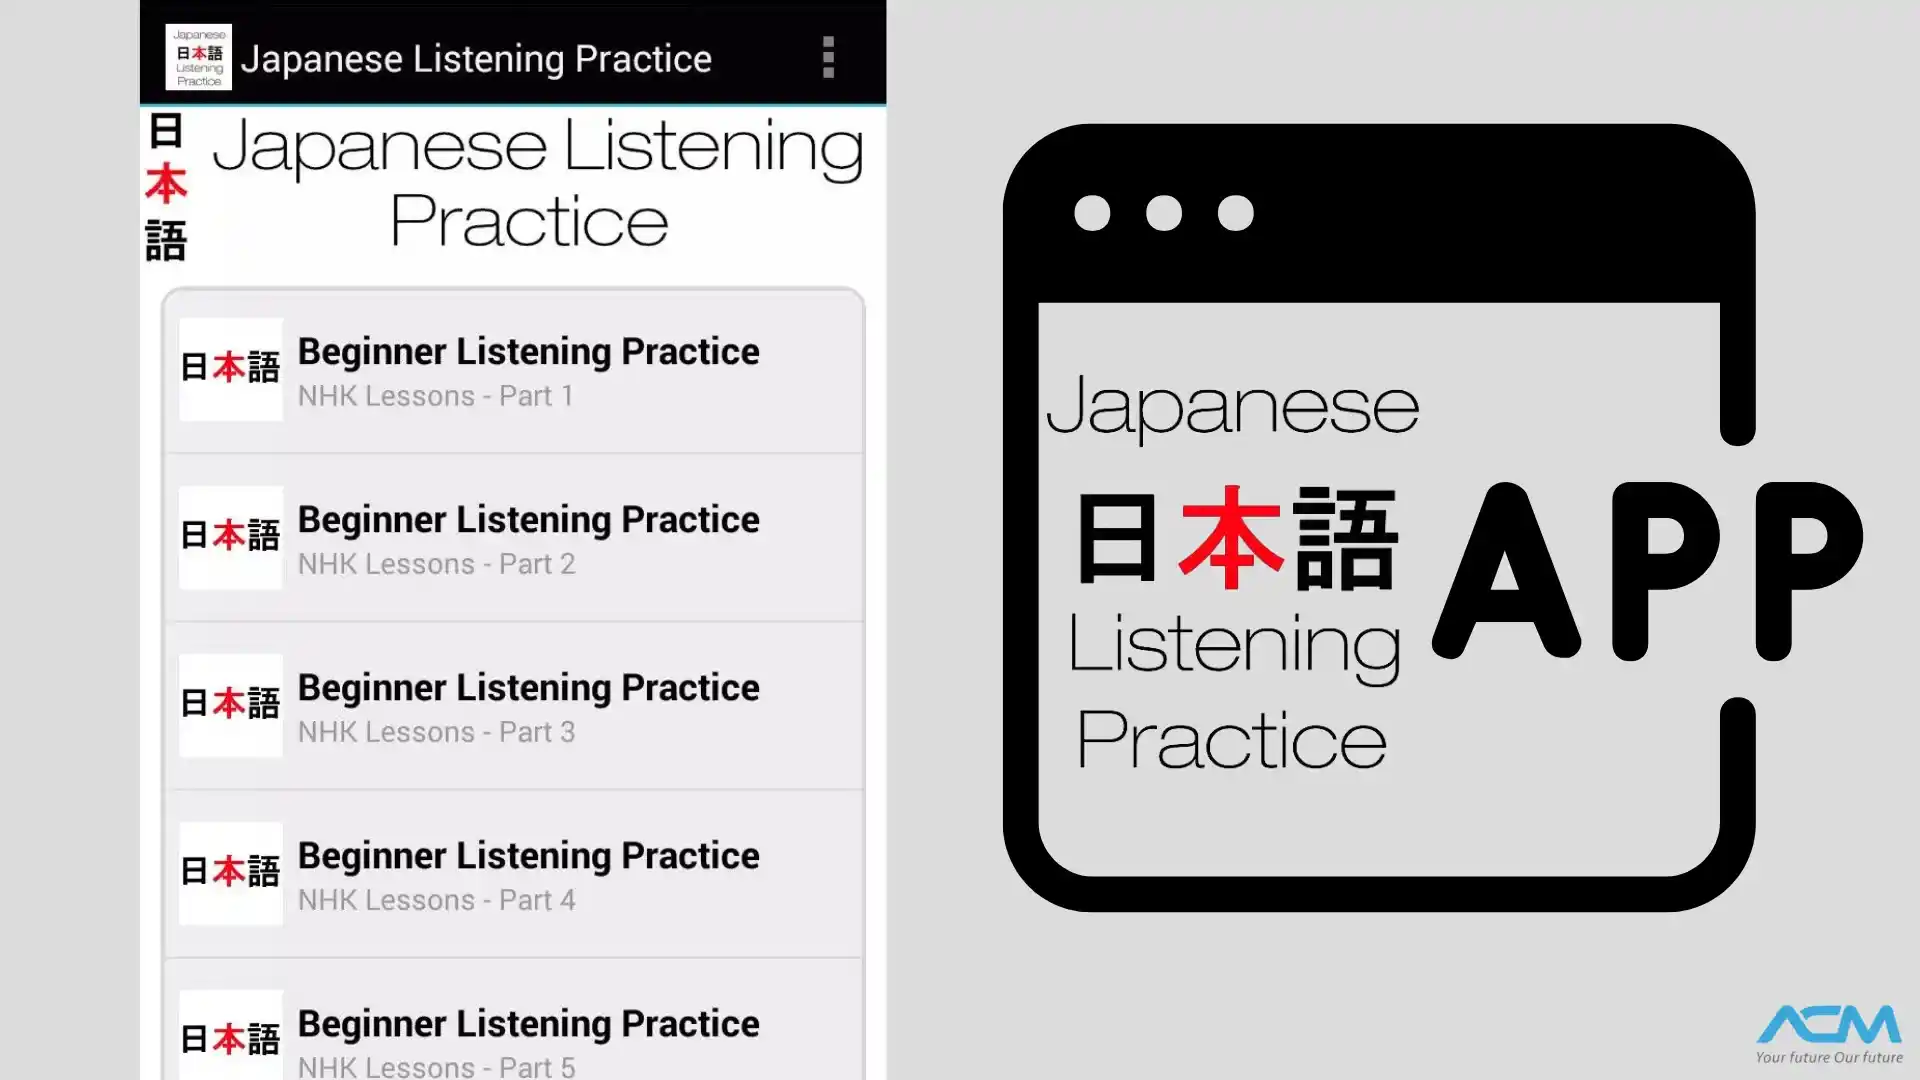 ứng dụng Japanese Listening Practice